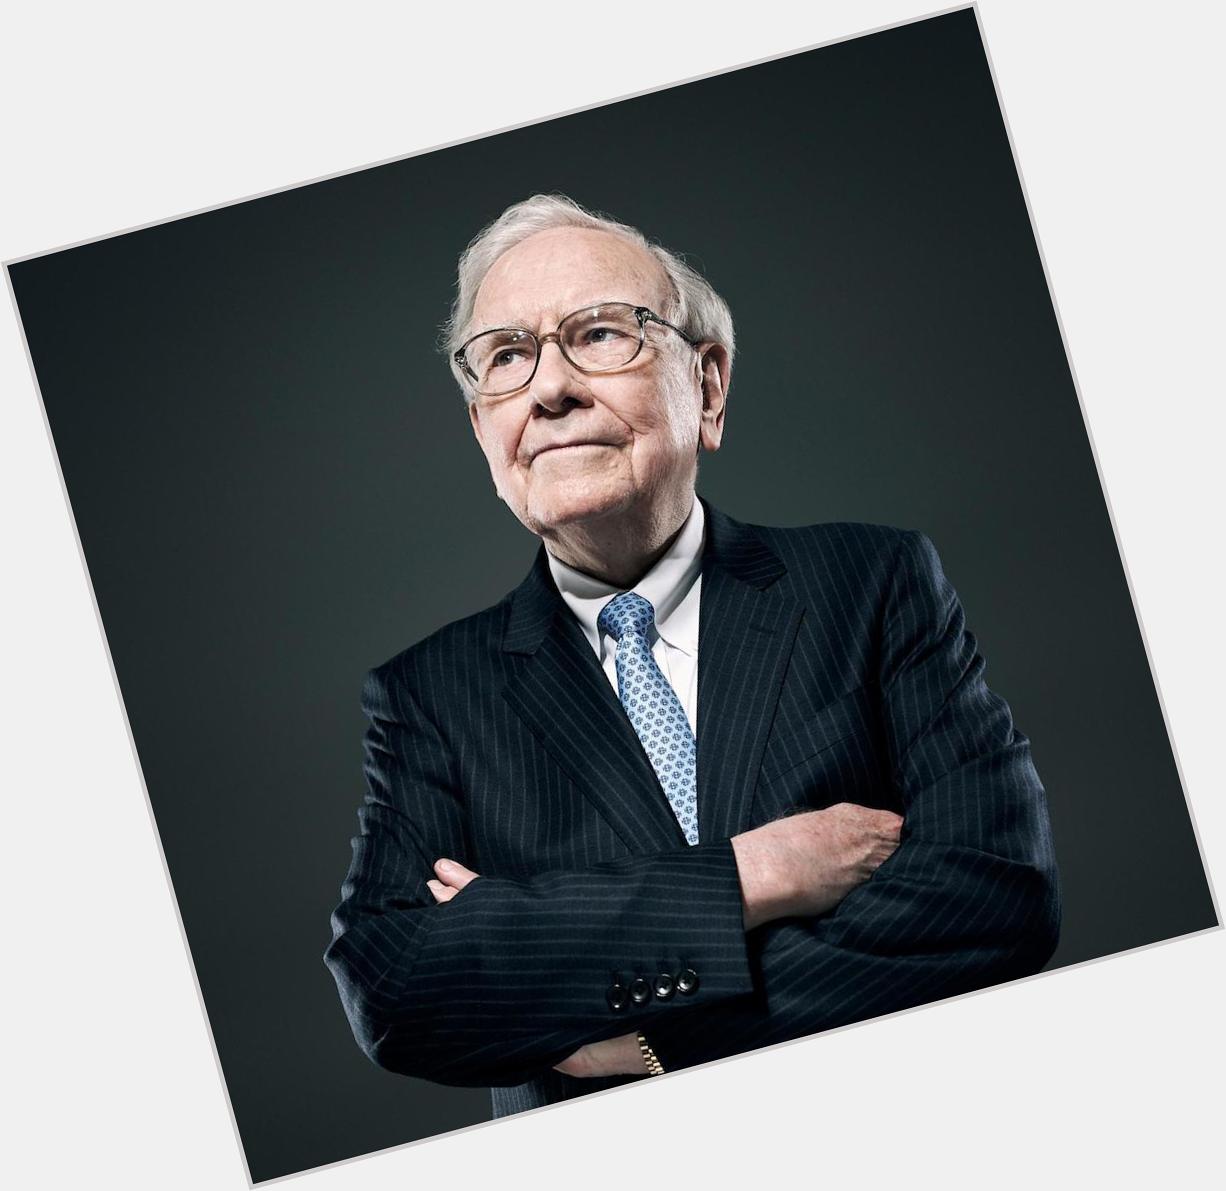 Warren Buffet turned 88 last week. In honor, here\s 30 of his best quotes:  